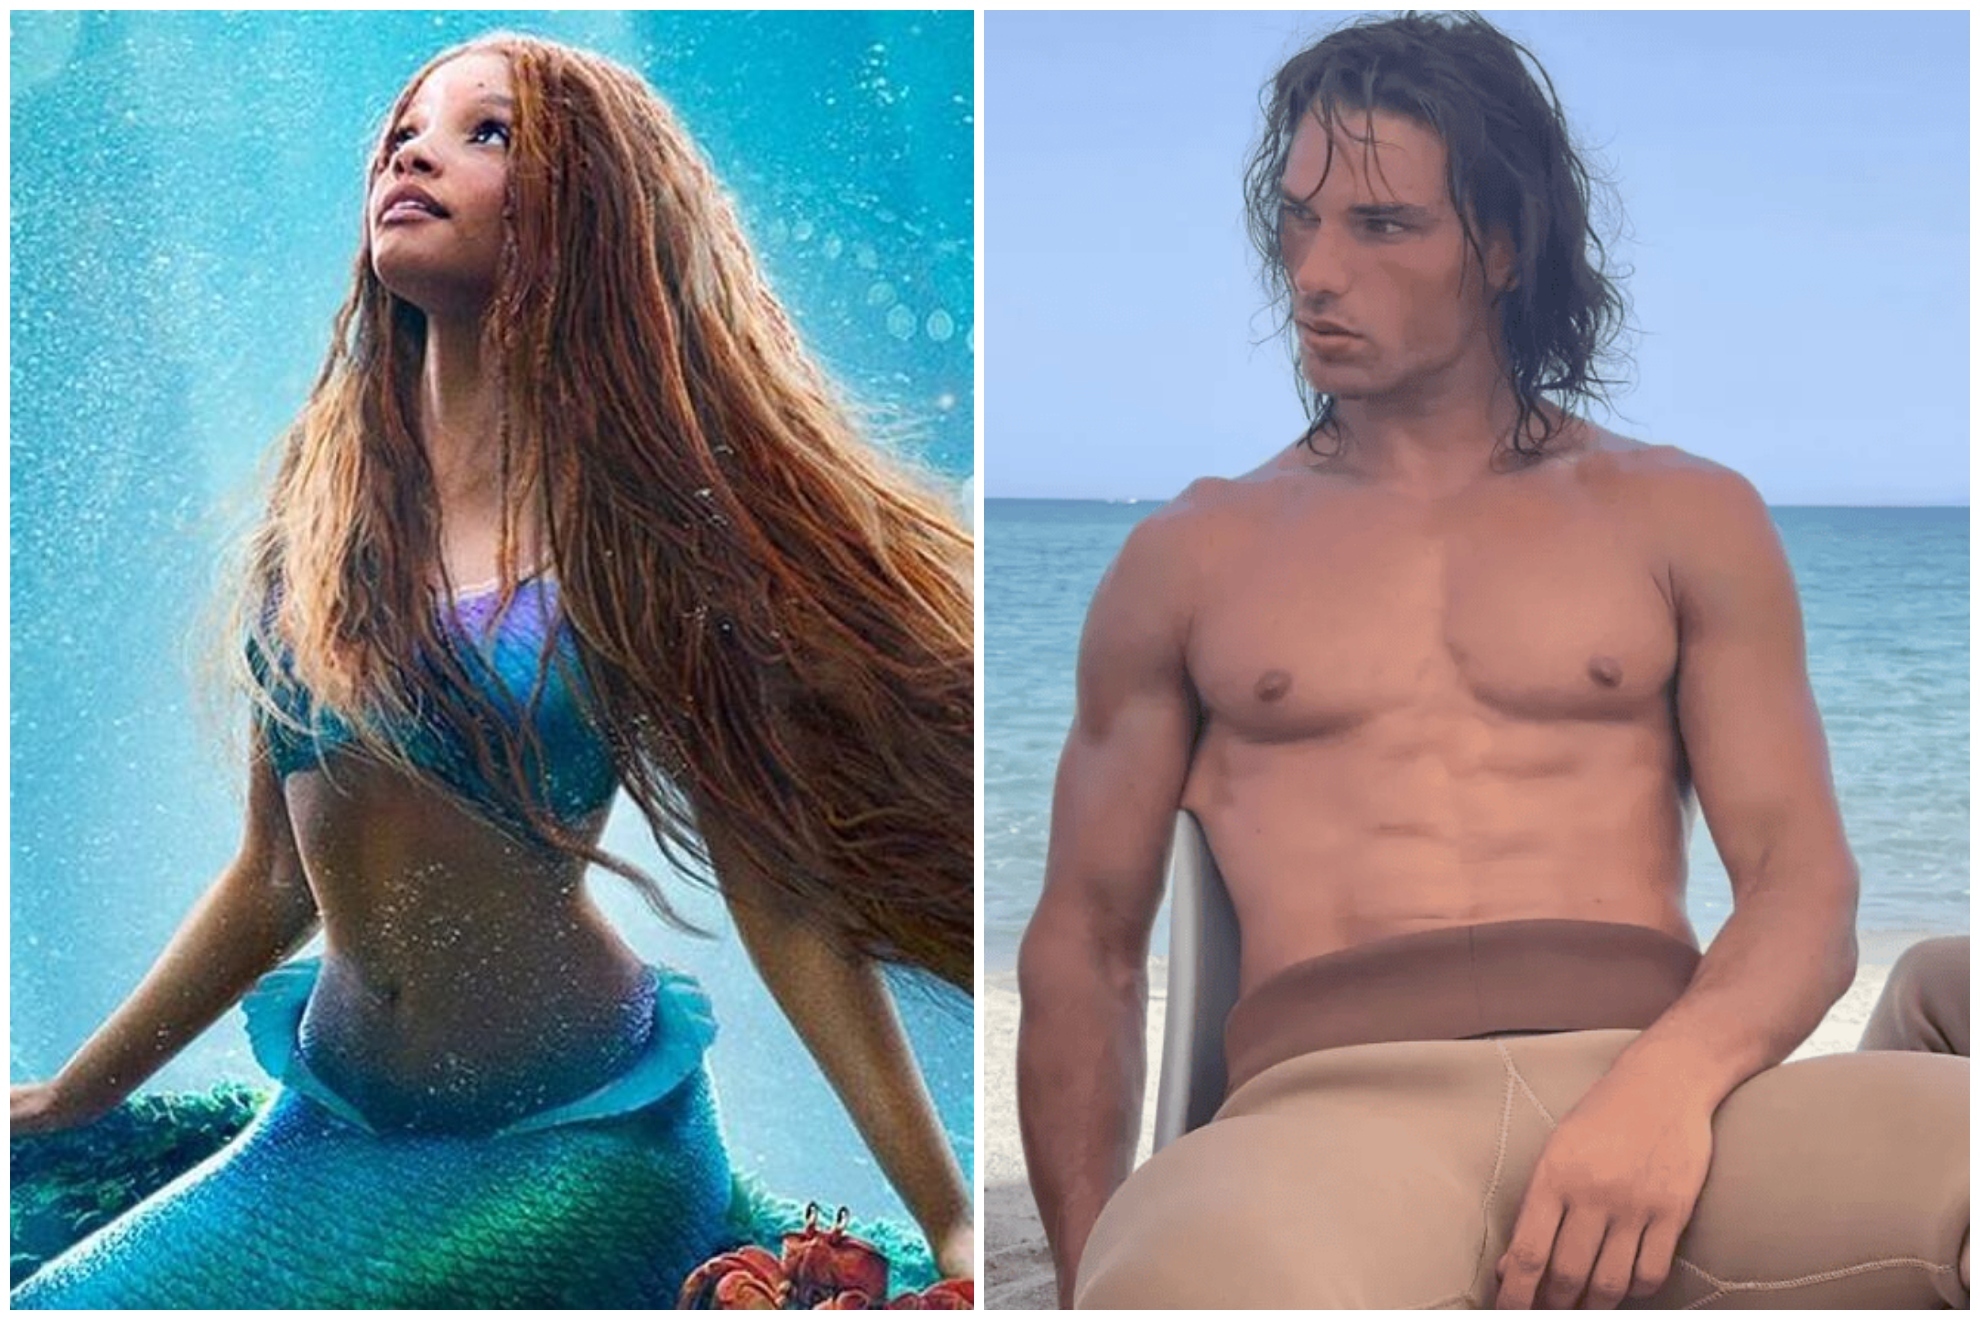 More controversy for Disney: pornstar in 'The Little Mermaid'